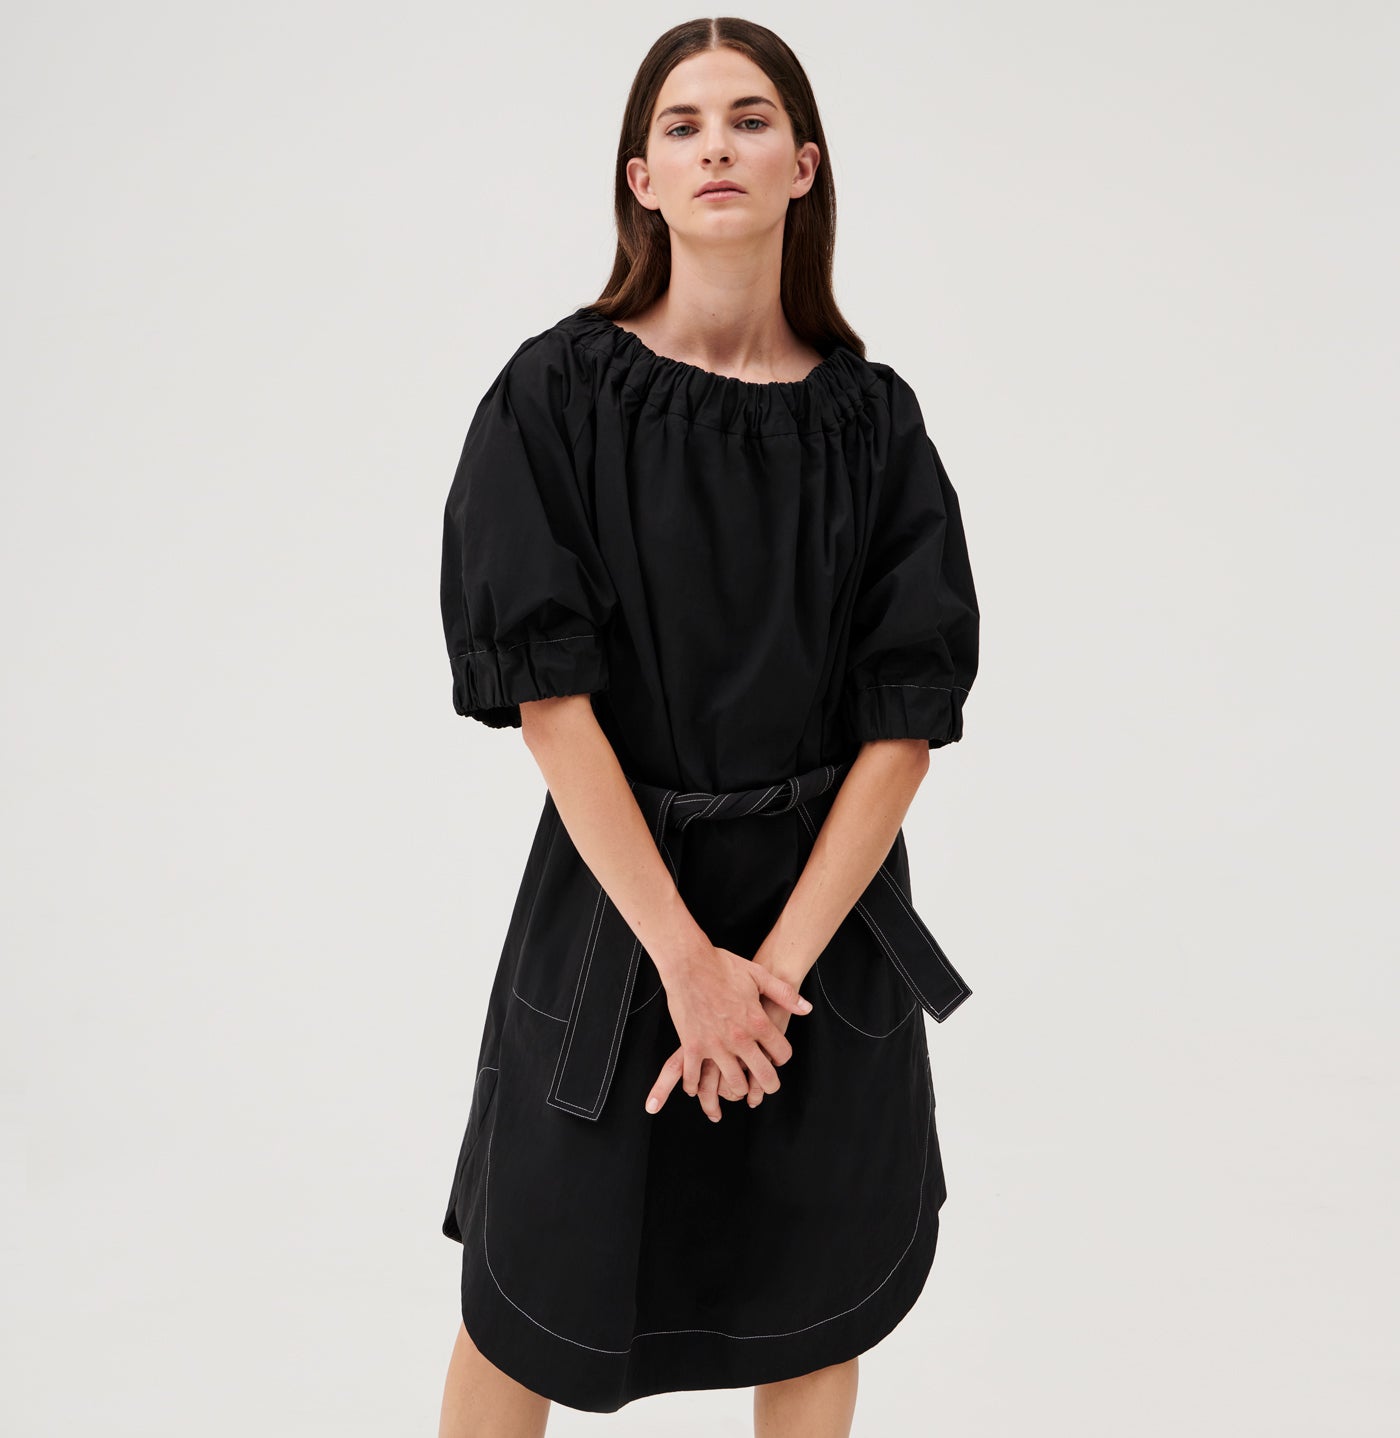 Cuspi Panorama Elasticated Dress in Black. Shop local and explore the latest collection of trans-seasonal styles designed and made in Melbourne, Australia. Cuspi: born with the desire to create considered high quality timeless pieces for everyday l